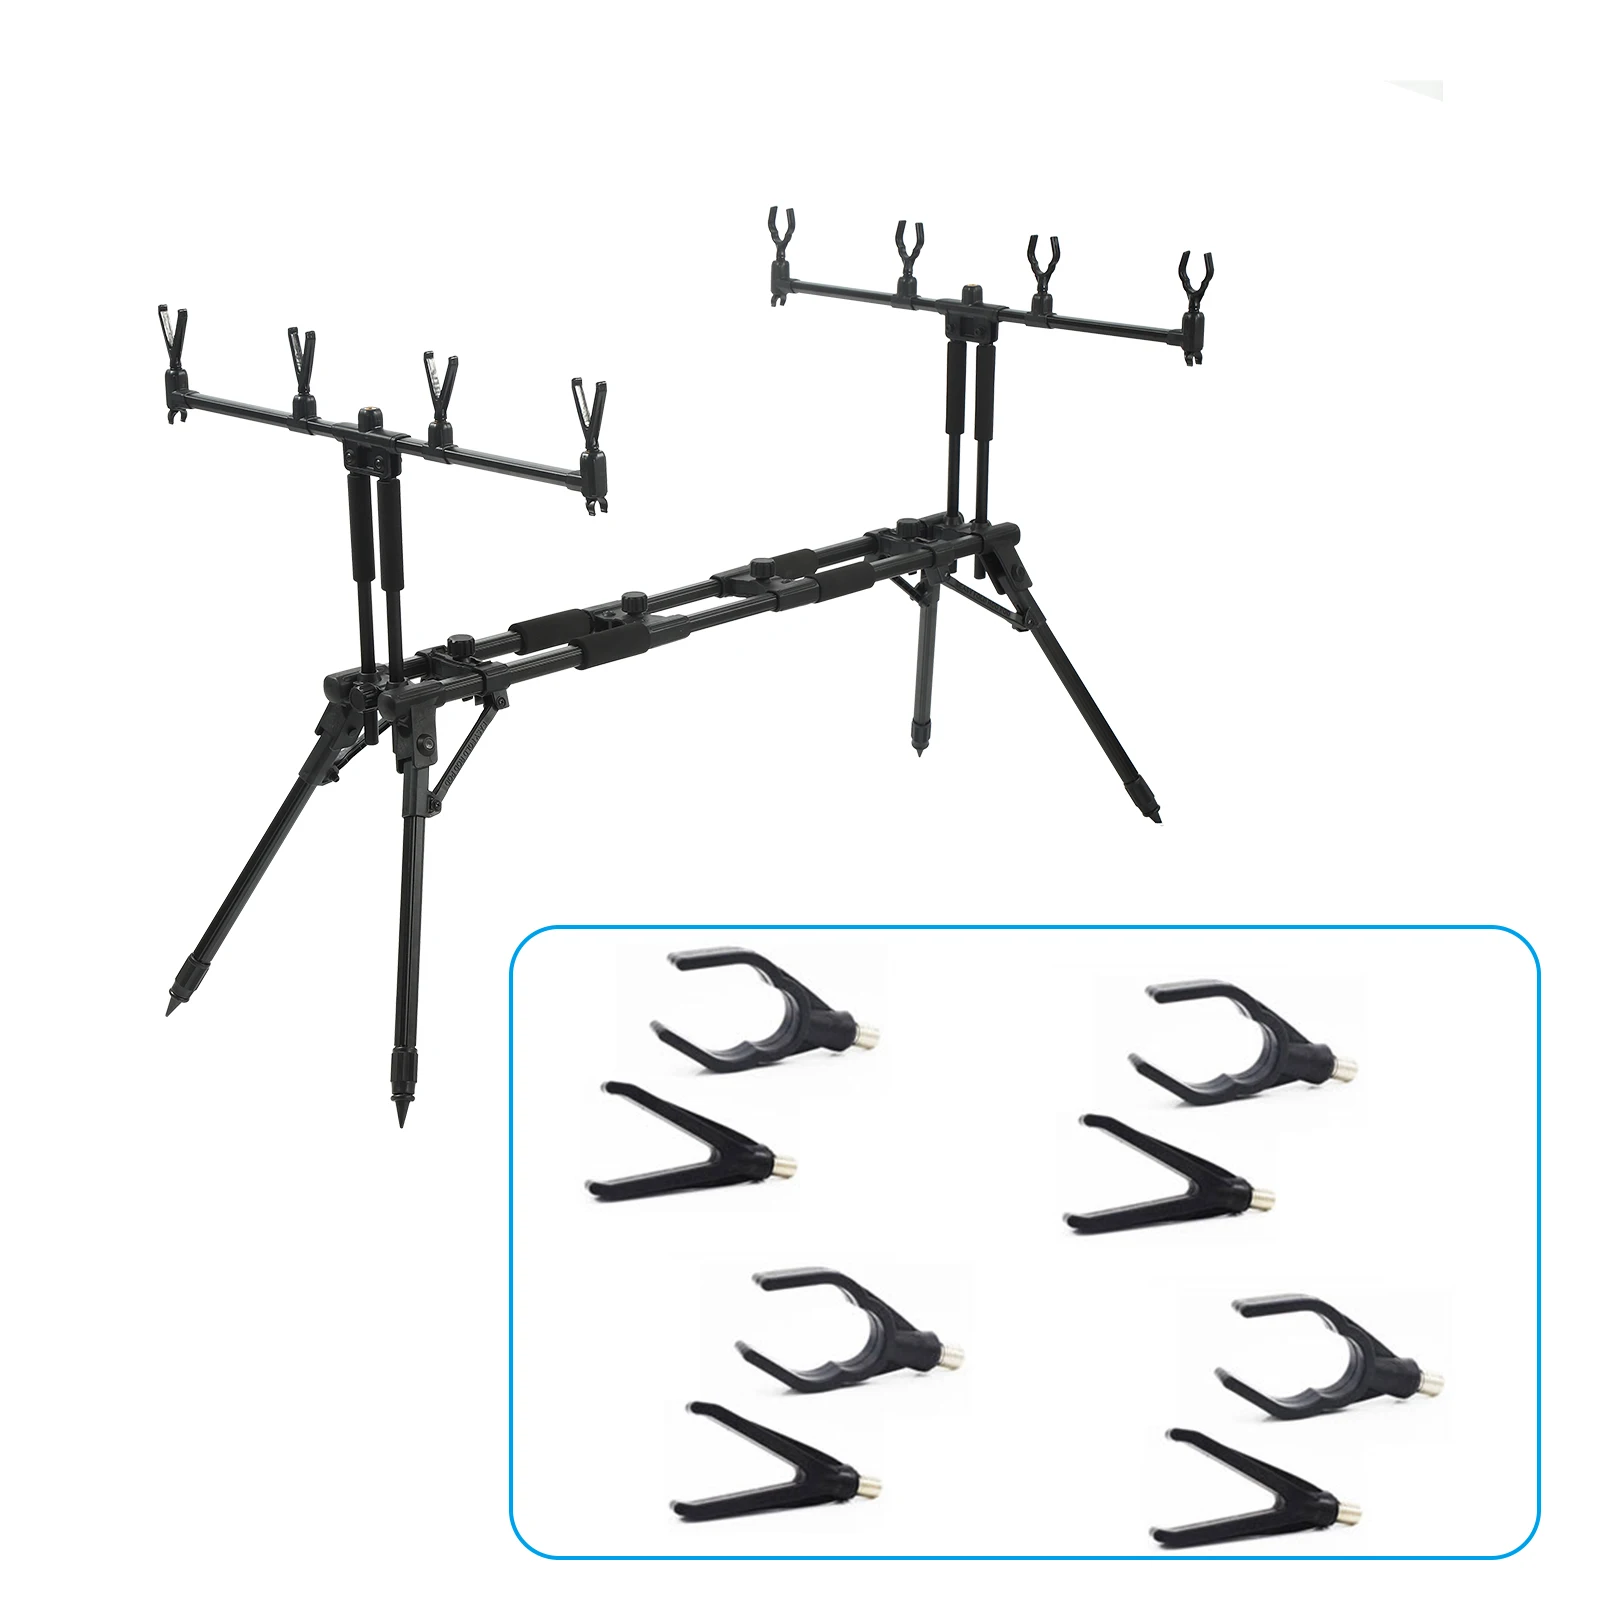 https://ae01.alicdn.com/kf/S1ee17839b33f414eac56b5c5f13f9b55v/Adjustable-Retractable-Carp-Fishing-Rod-Pod-Stand-Holder-Foldable-Fishing-Pole-Pod-Stand-with-Carry-Case.jpg